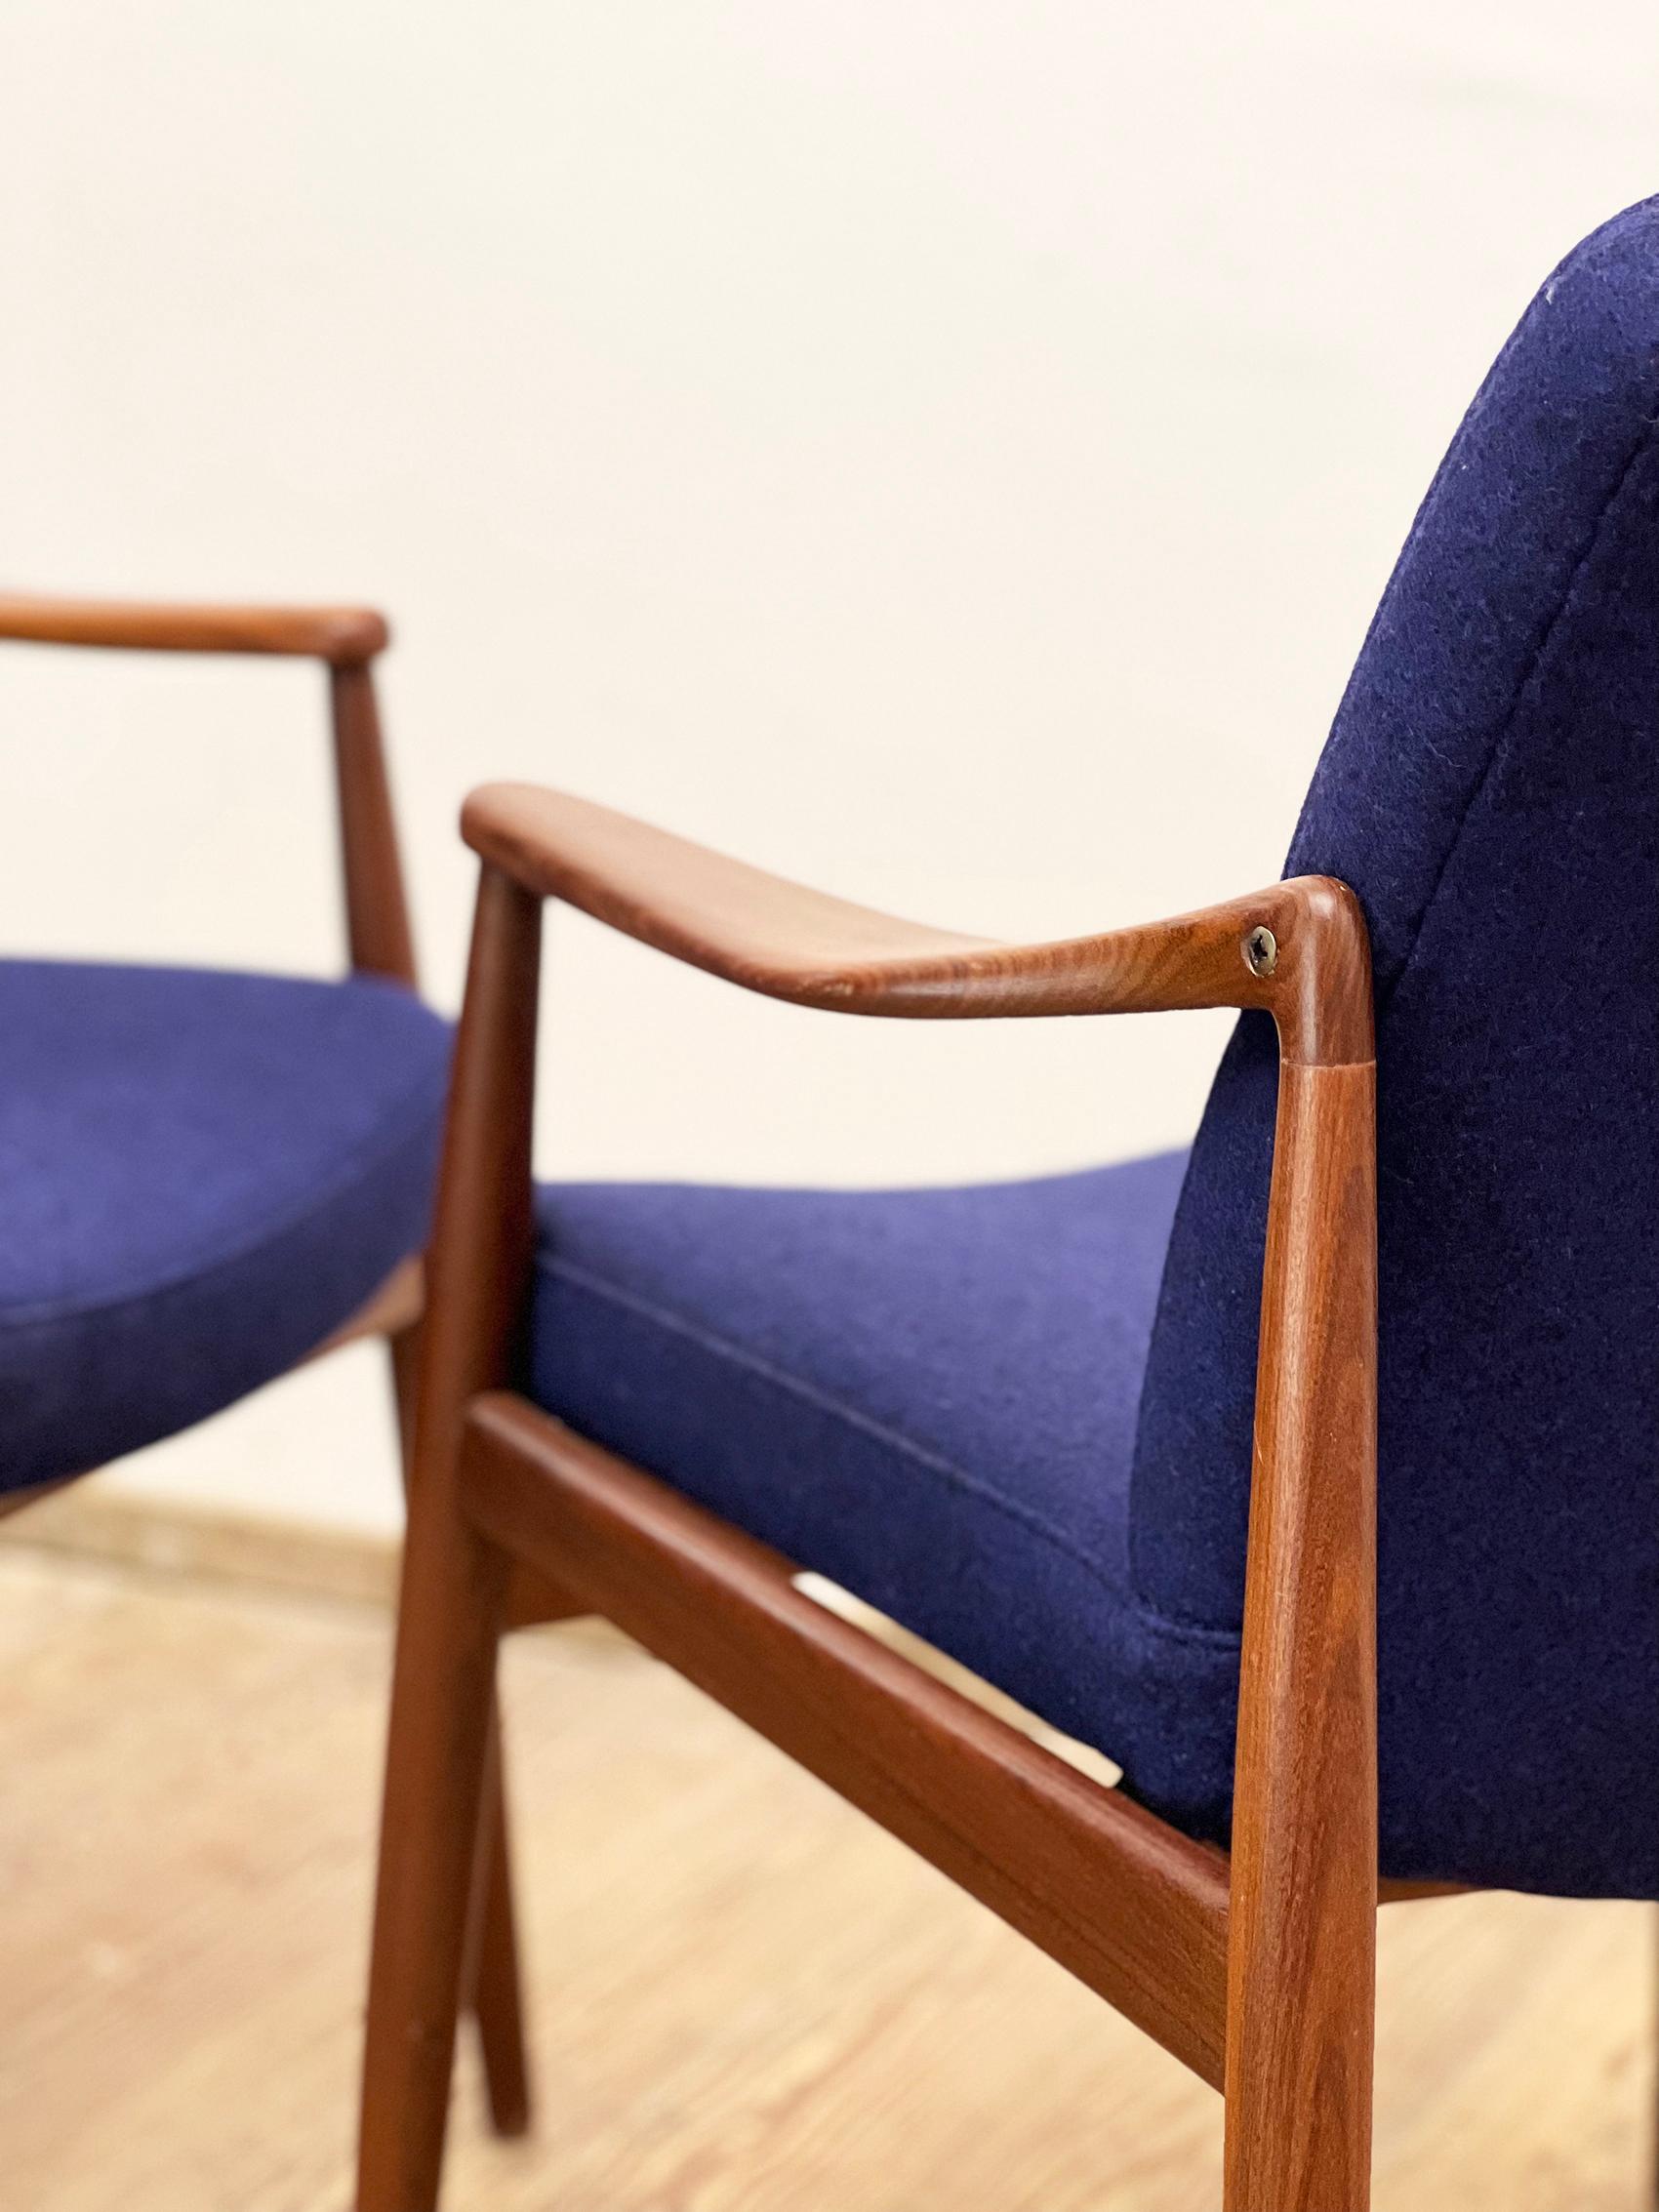 Two Mid-Century Modern Teak Armchairs by Hartmut Lohmeyer for Wilkhahn, 1950s For Sale 6